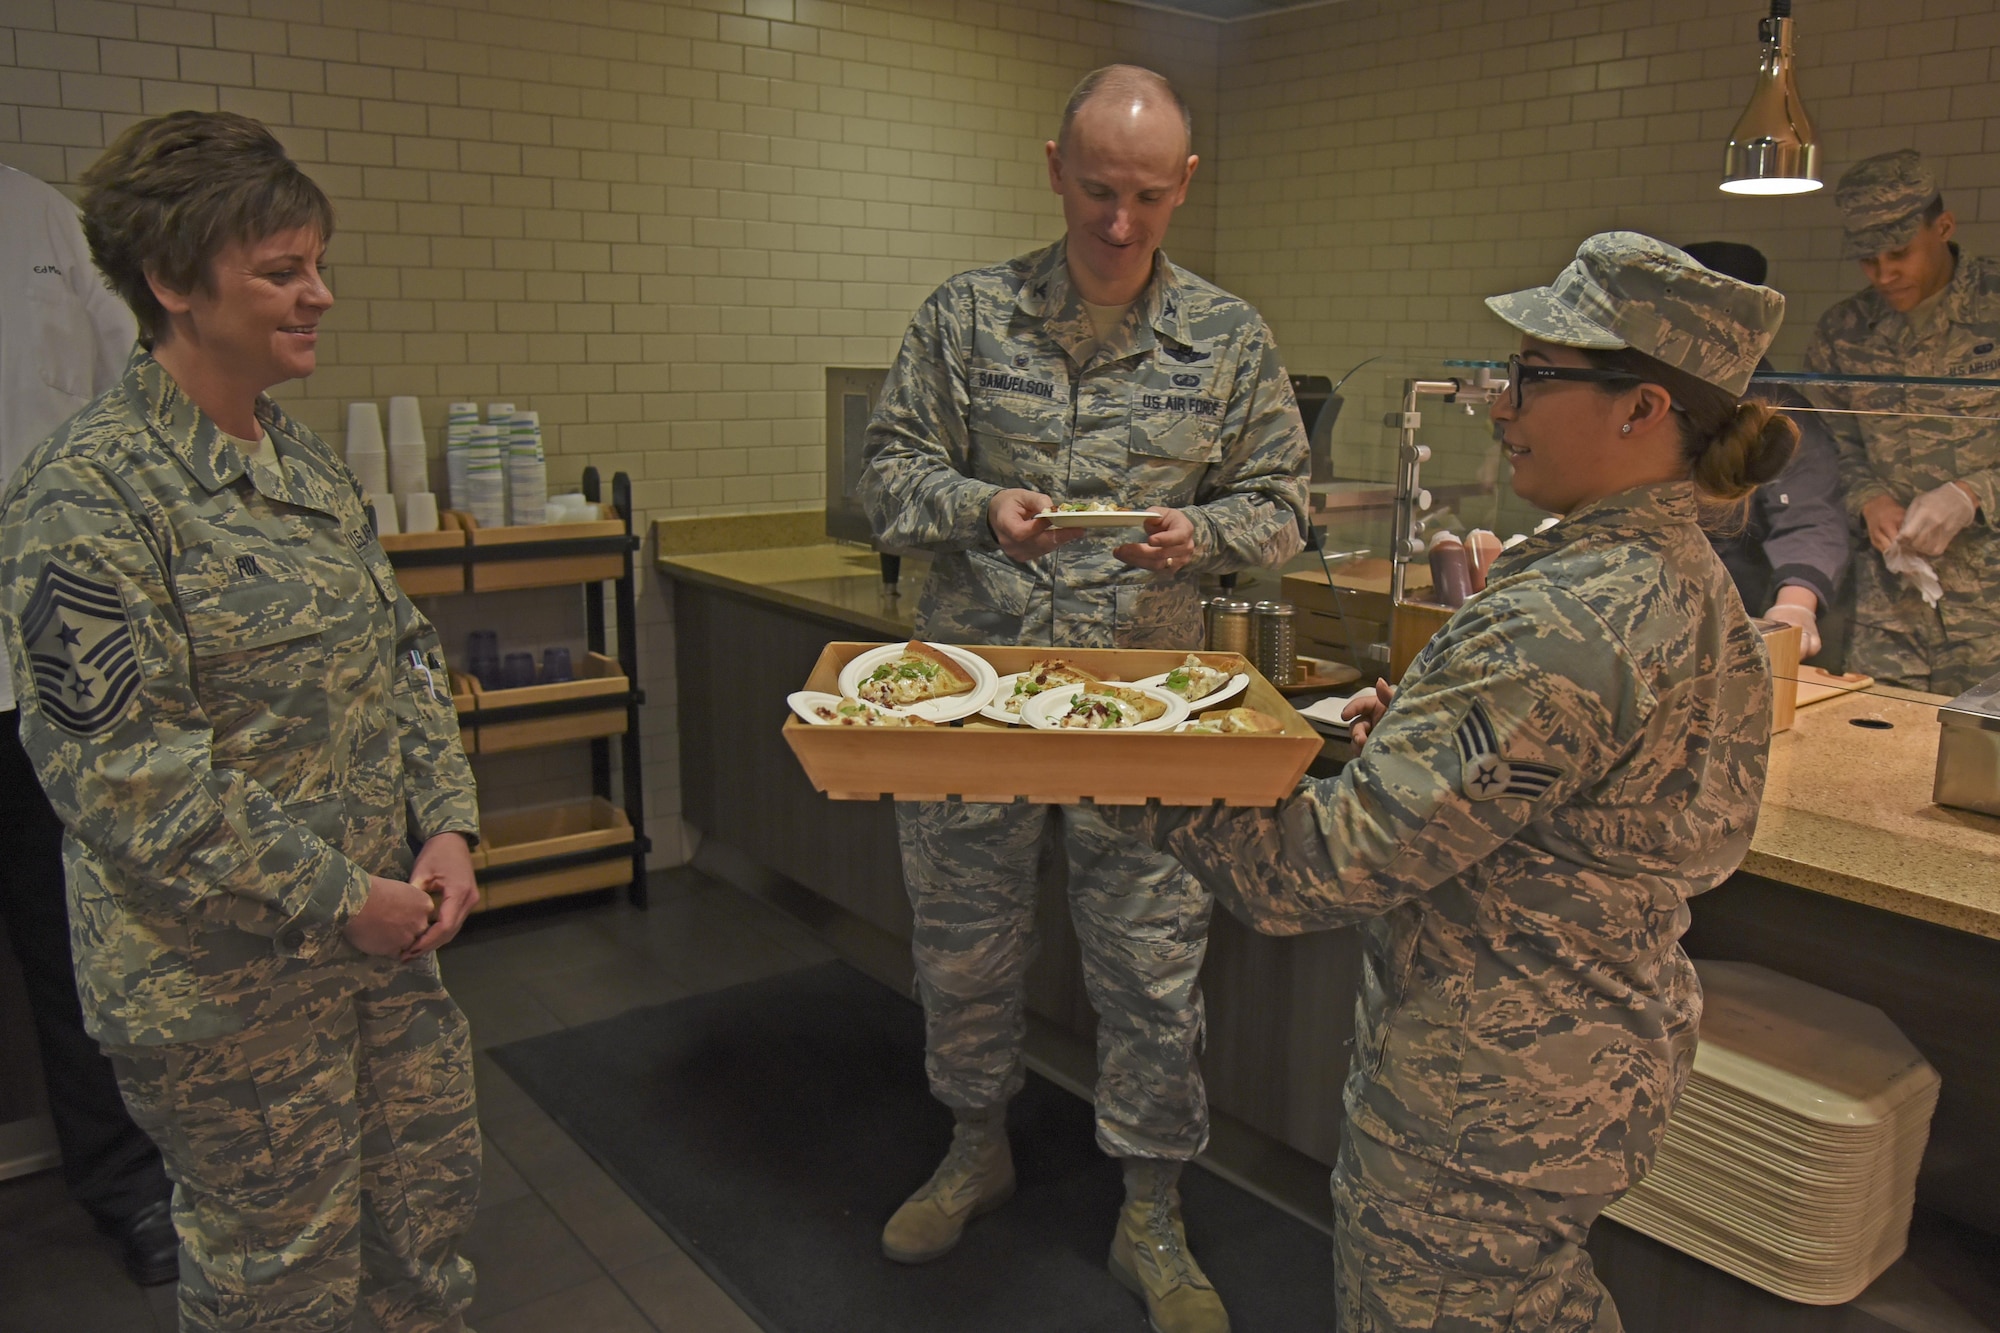 Col. Ryan Samuelson, 92nd Air Refueling Wing commander, and Chief Master Sgt. Shannon Rix, 92nd ARW command chief, taste test new Warrior Mission Essential Feeding Facility options during a ribbon-cutting ceremony Mar. 27, 2017, at Fairchild Air Force Base, Washington. Senior Airman Samantha Acevedo, 92nd Force Support Squadron services journeyman, presented the healthier, made-to-order CIAO Pizzeria to base leadership. (U.S. Air Force photo/Senior Airman Mackenzie Richardson)